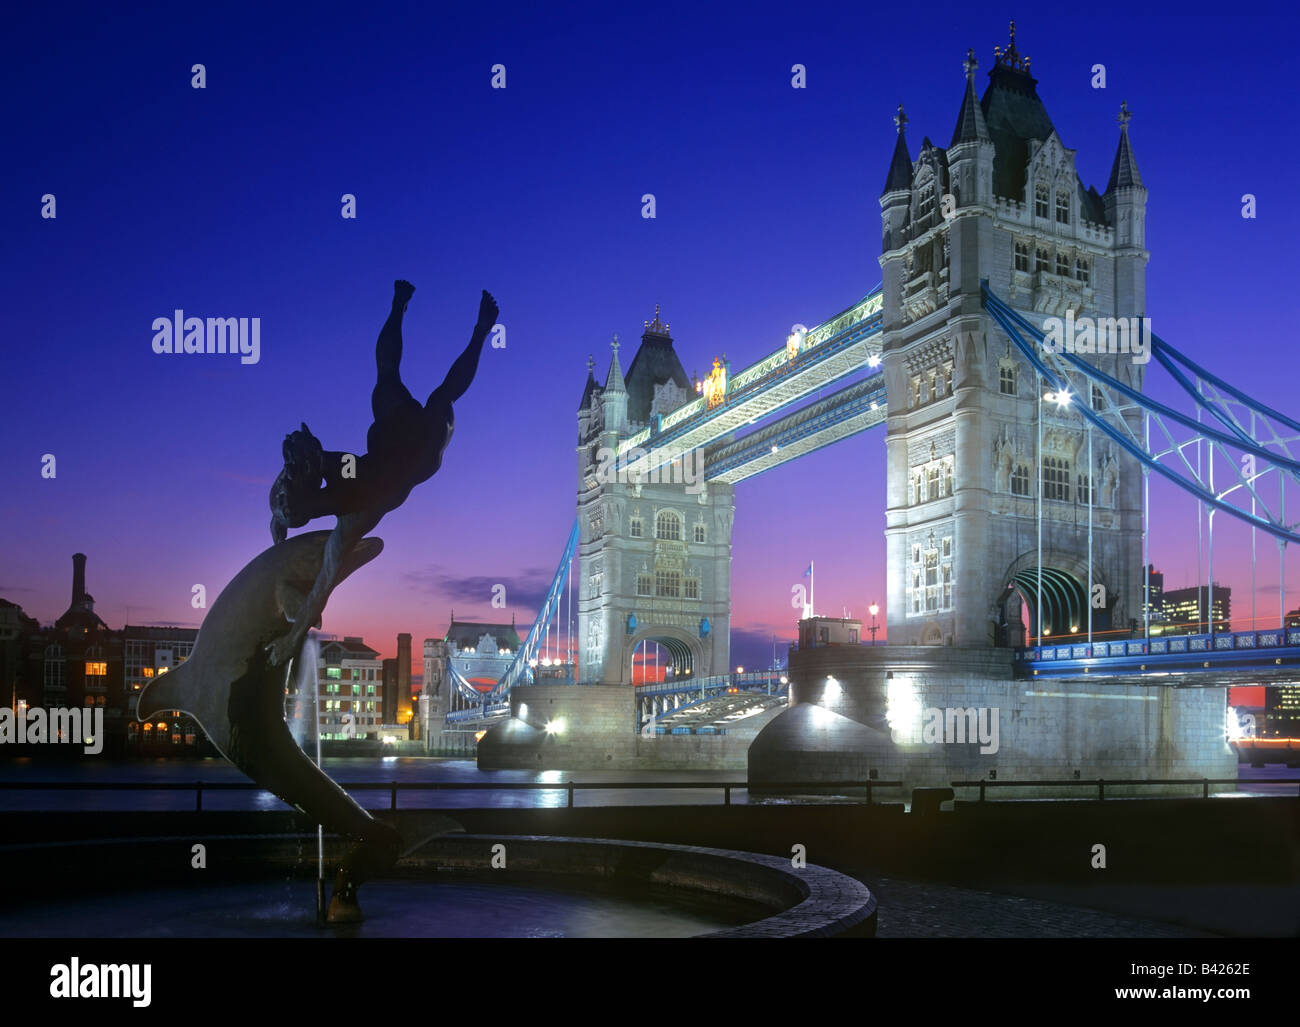 Tower Bridge Night Landscape City River Thames London lit up at night with statue of girl and dolphin fountain in foreground,City of London England UK Stock Photo